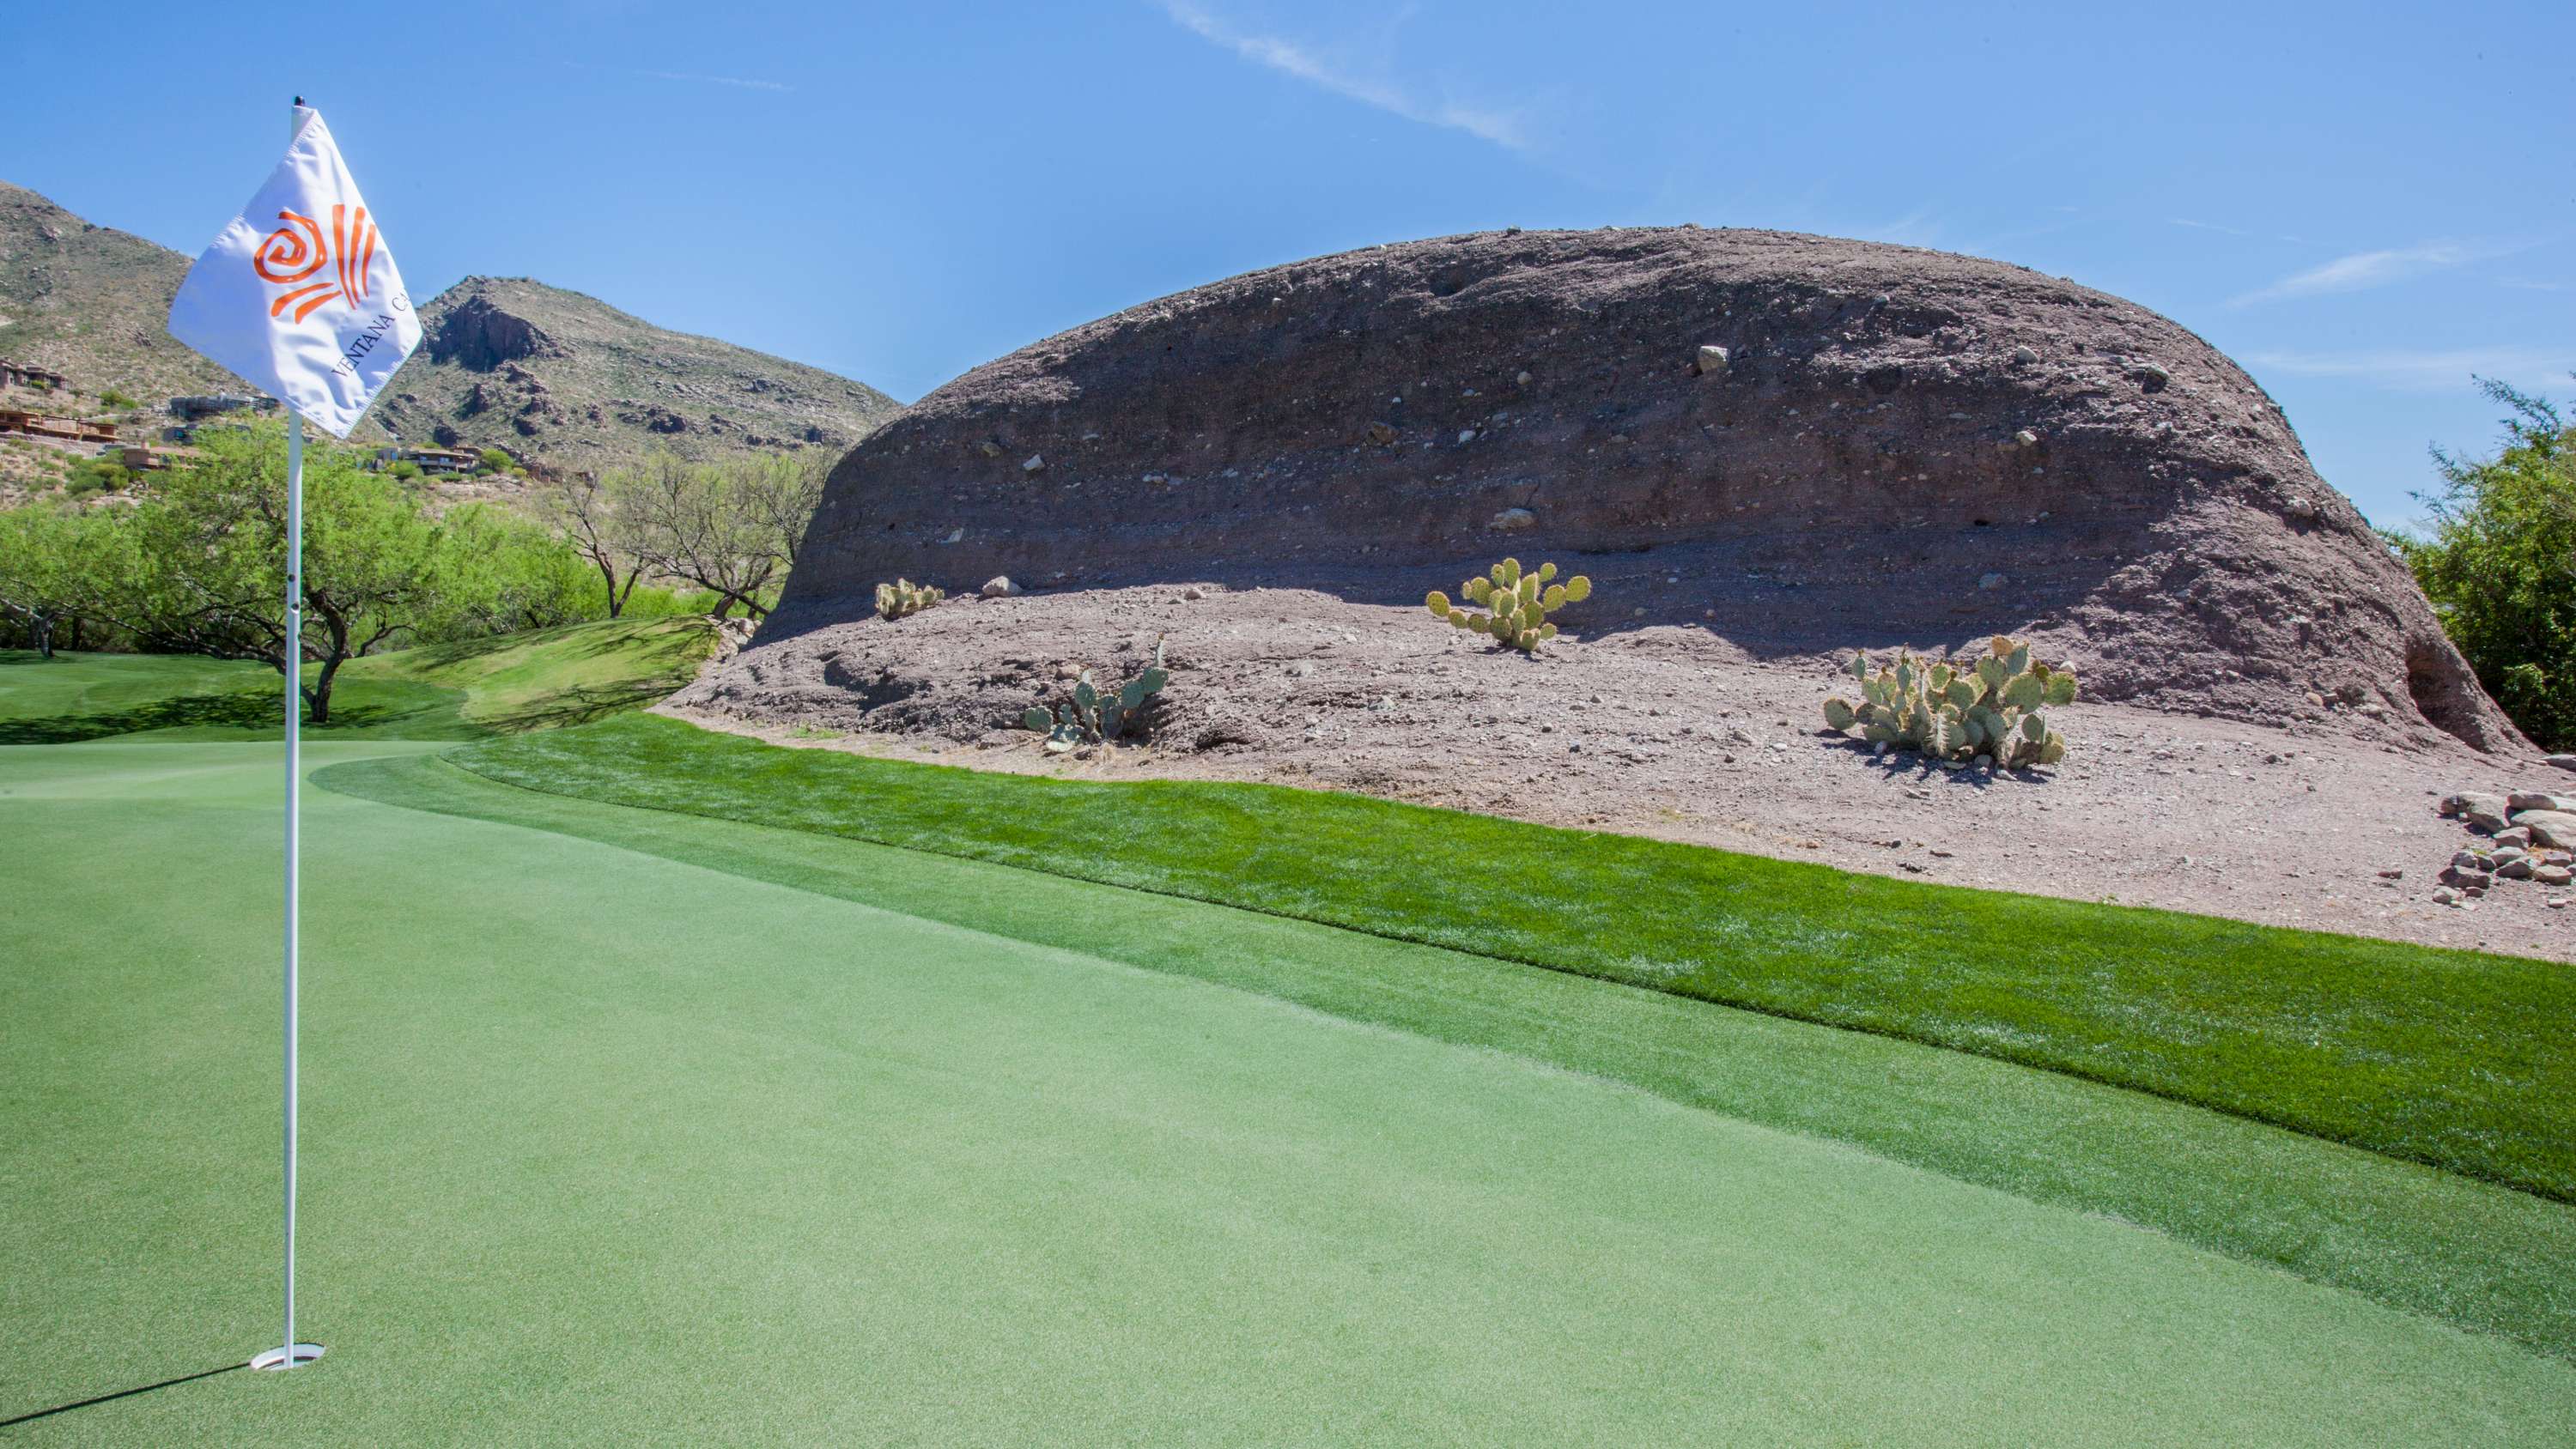 Large rock next to golf green